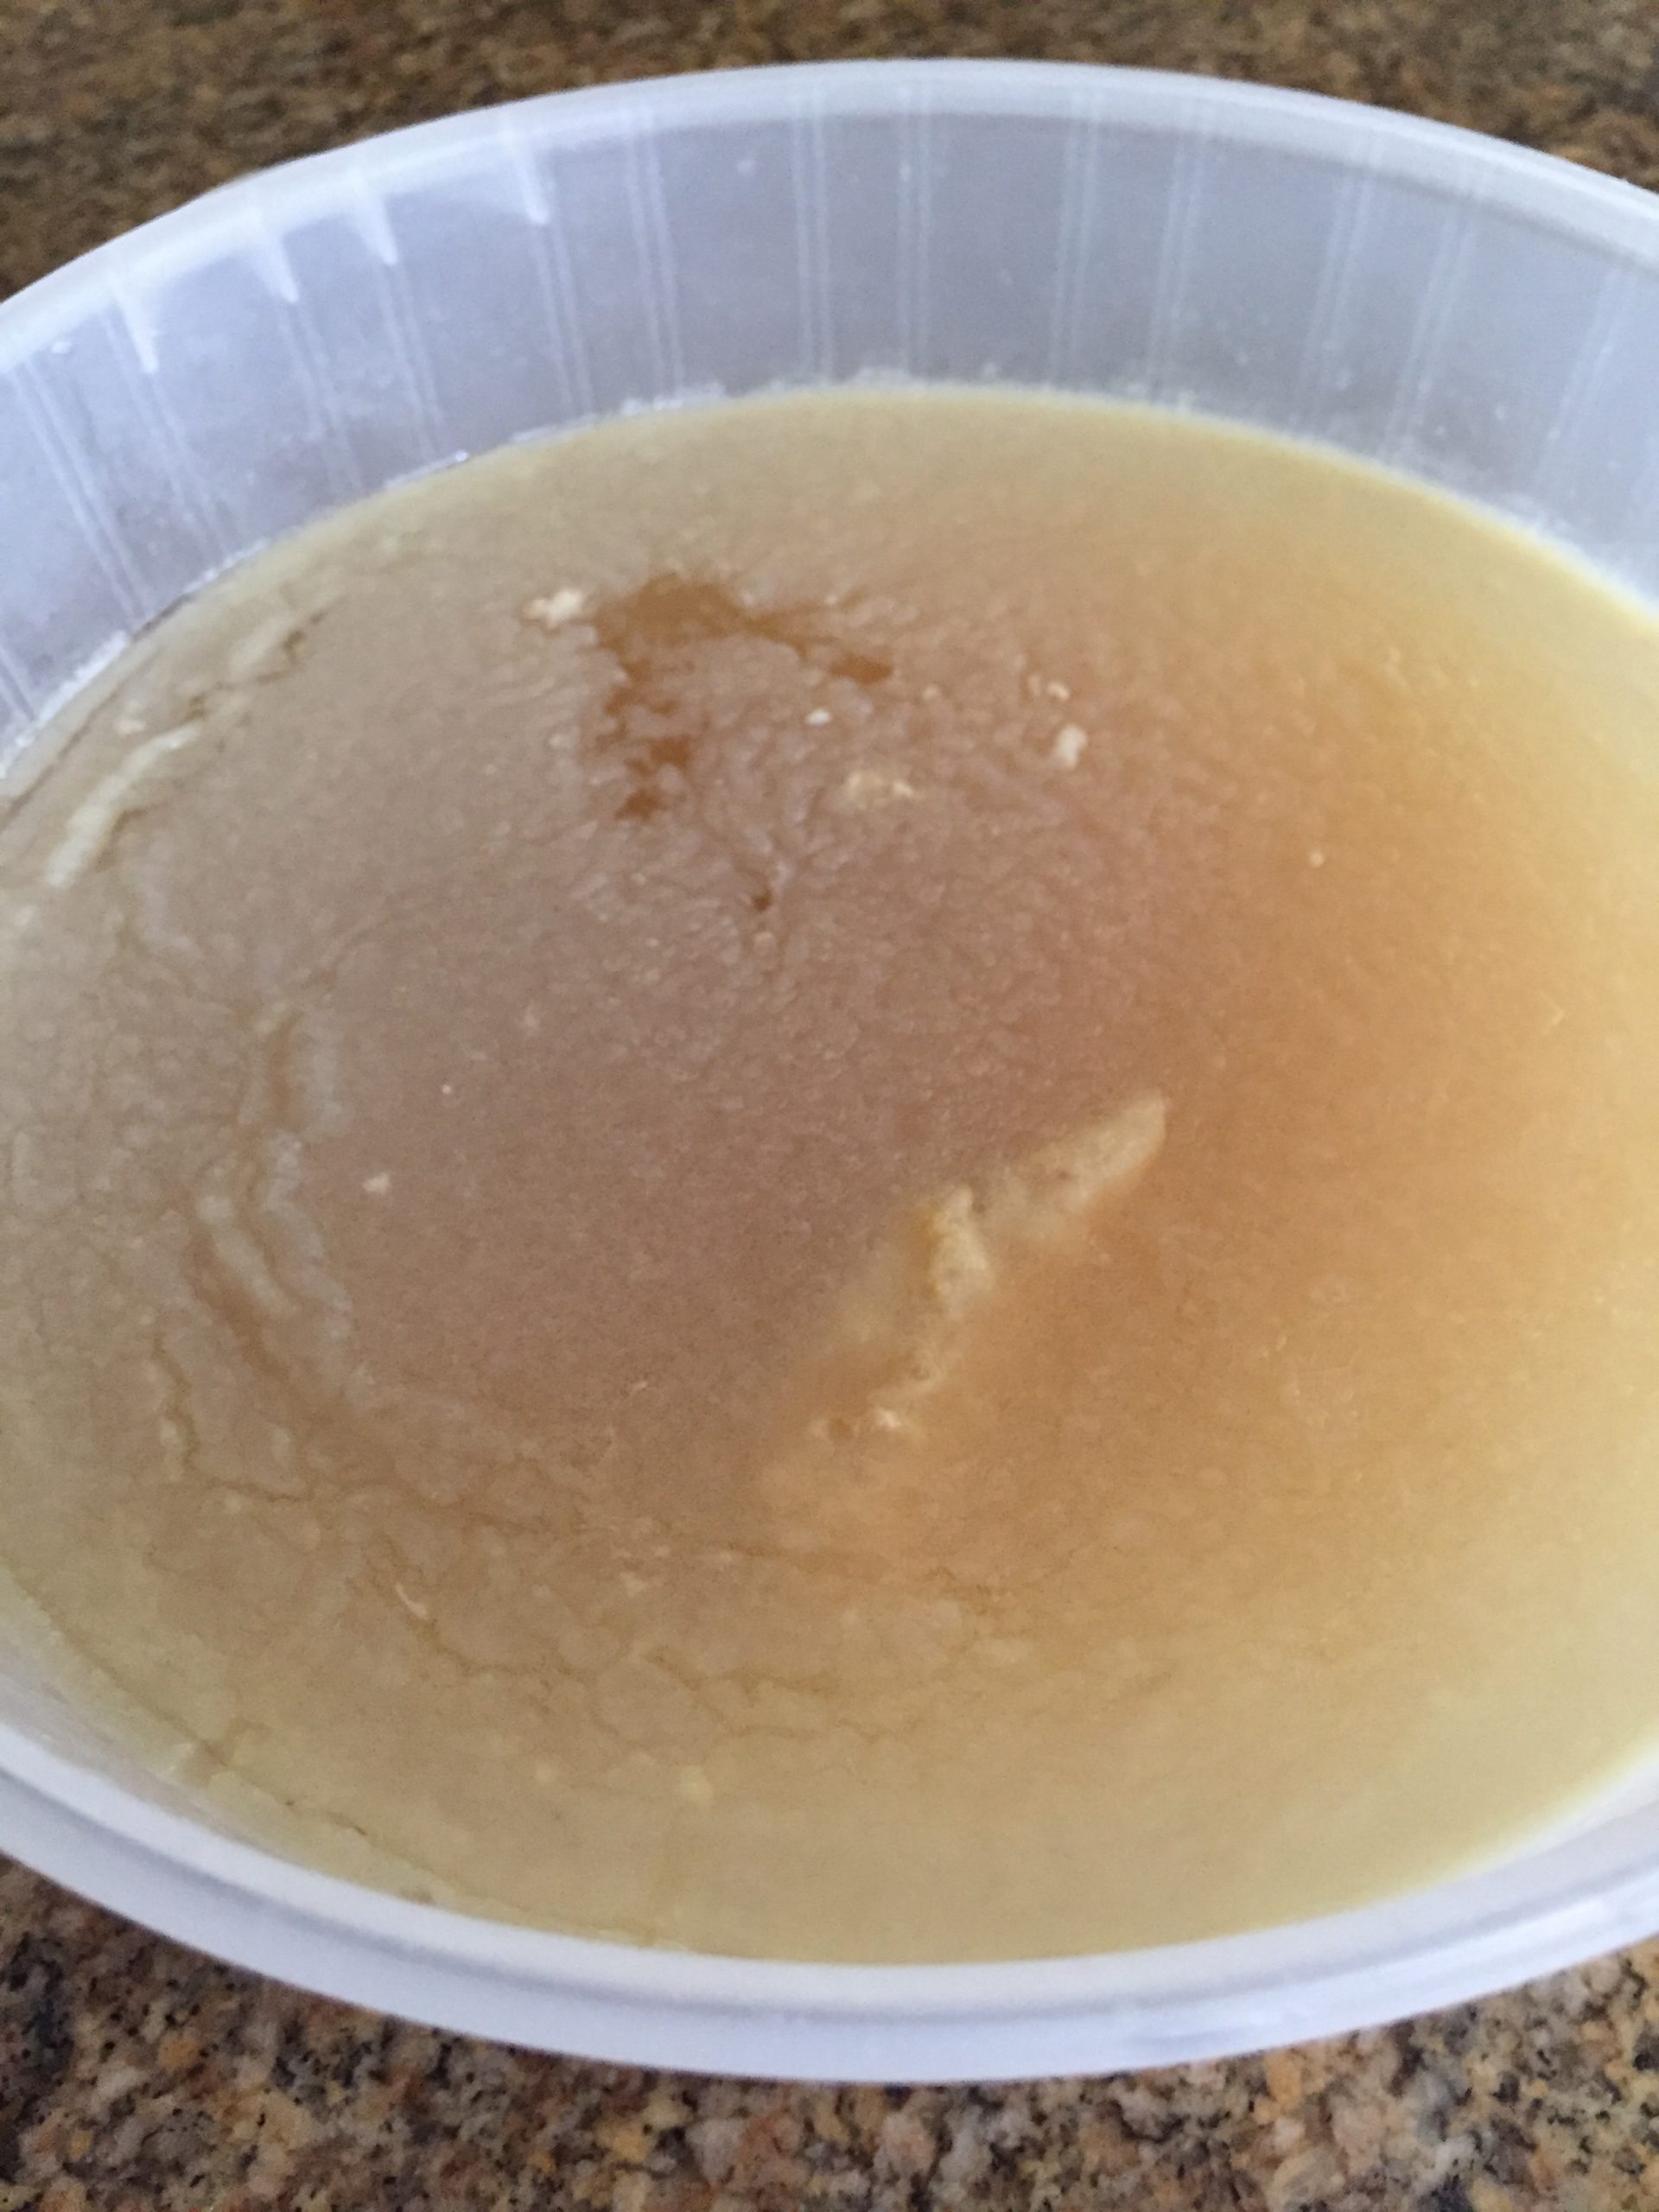 Cooled Chicken broth with fat layer